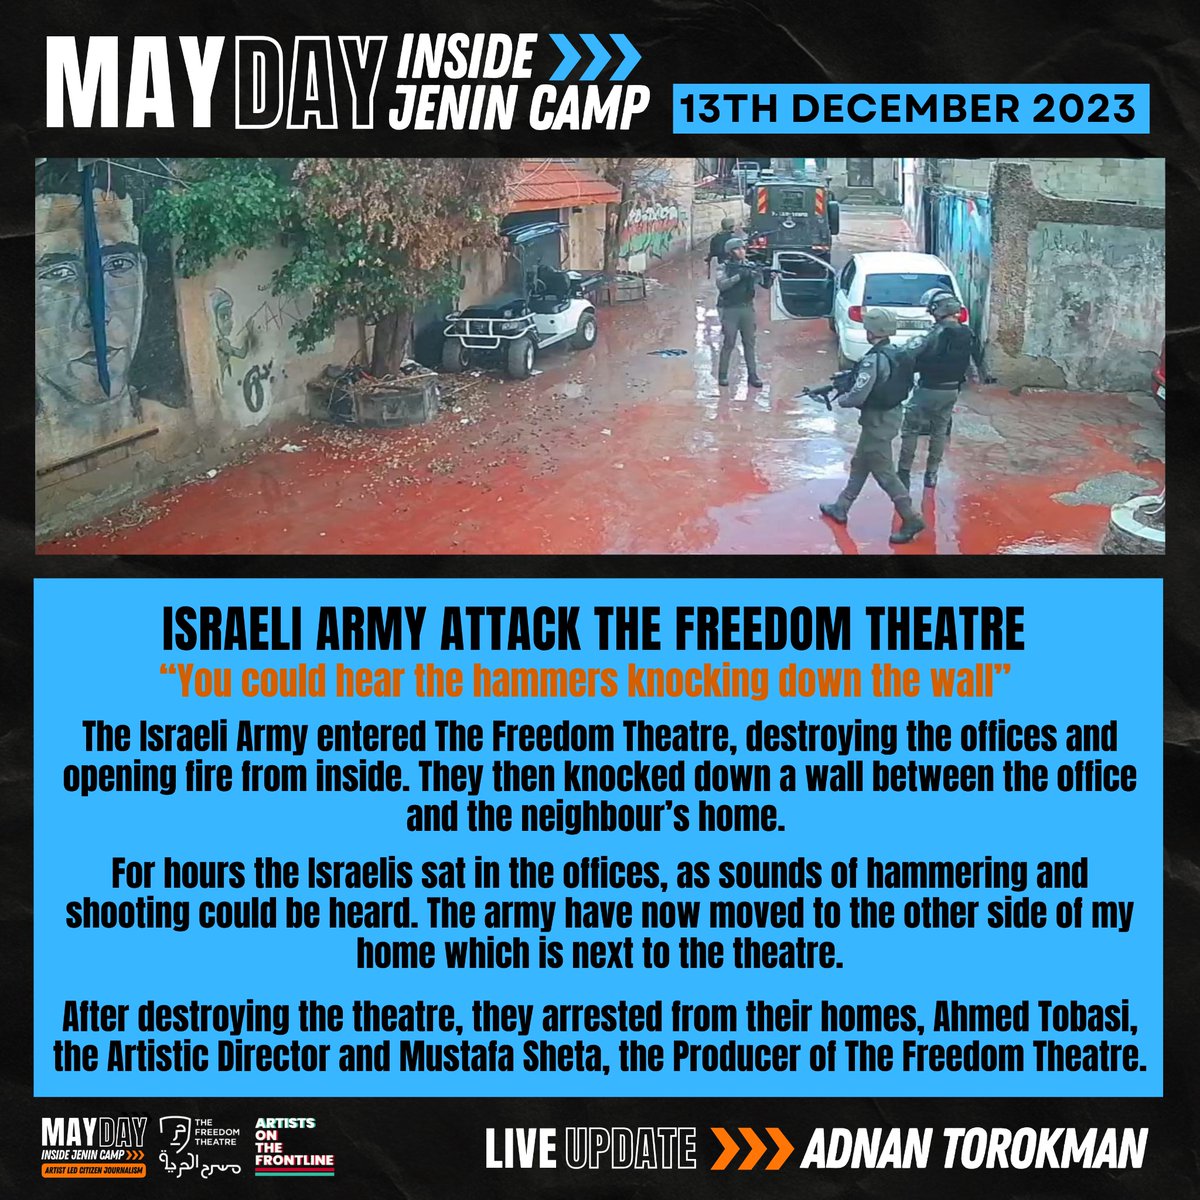 Today the Israeli Army attacked The Freedom Theatre opening fire from inside destroying the offices They have taken hostage AD @ahmedtobasi & Producer Mustafa Sheta #Mayday Created by @freedom_theatre & @artistfrontline #Jenin #JeninUnderAttack #Palestine #Theatre #جنين